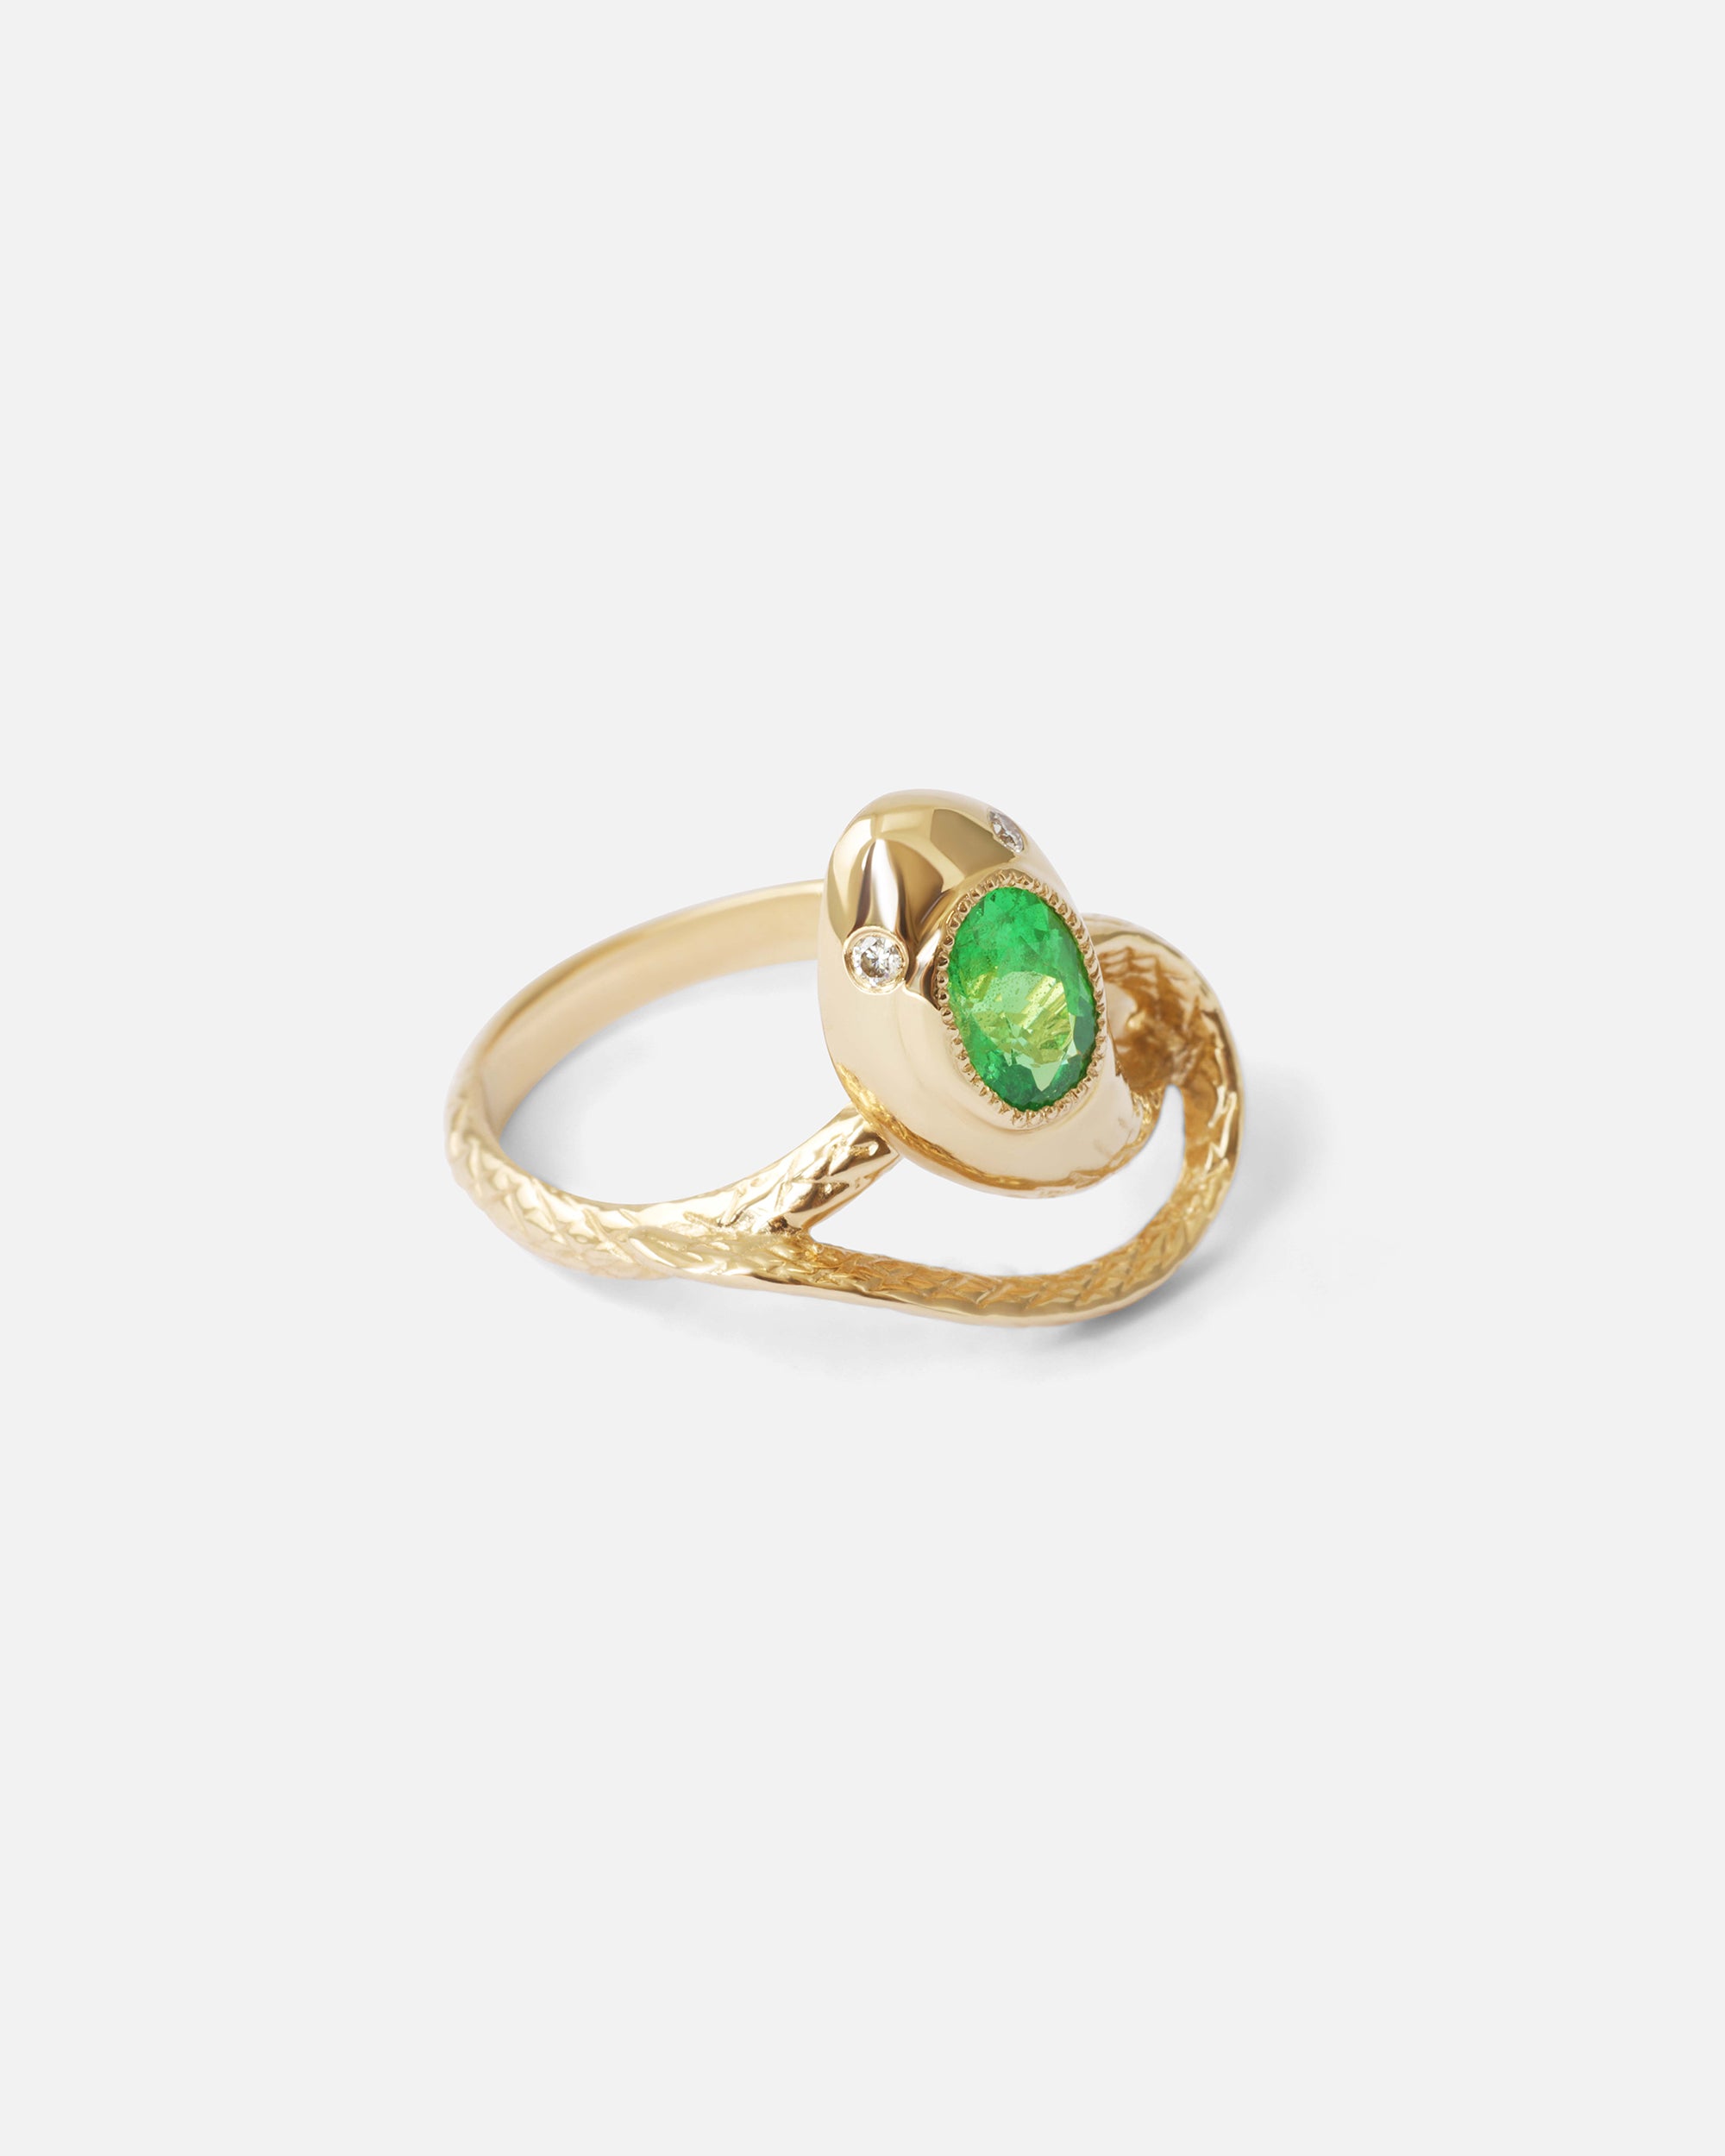 Serpentes Ring / Tsavorite and Diamonds By Ides